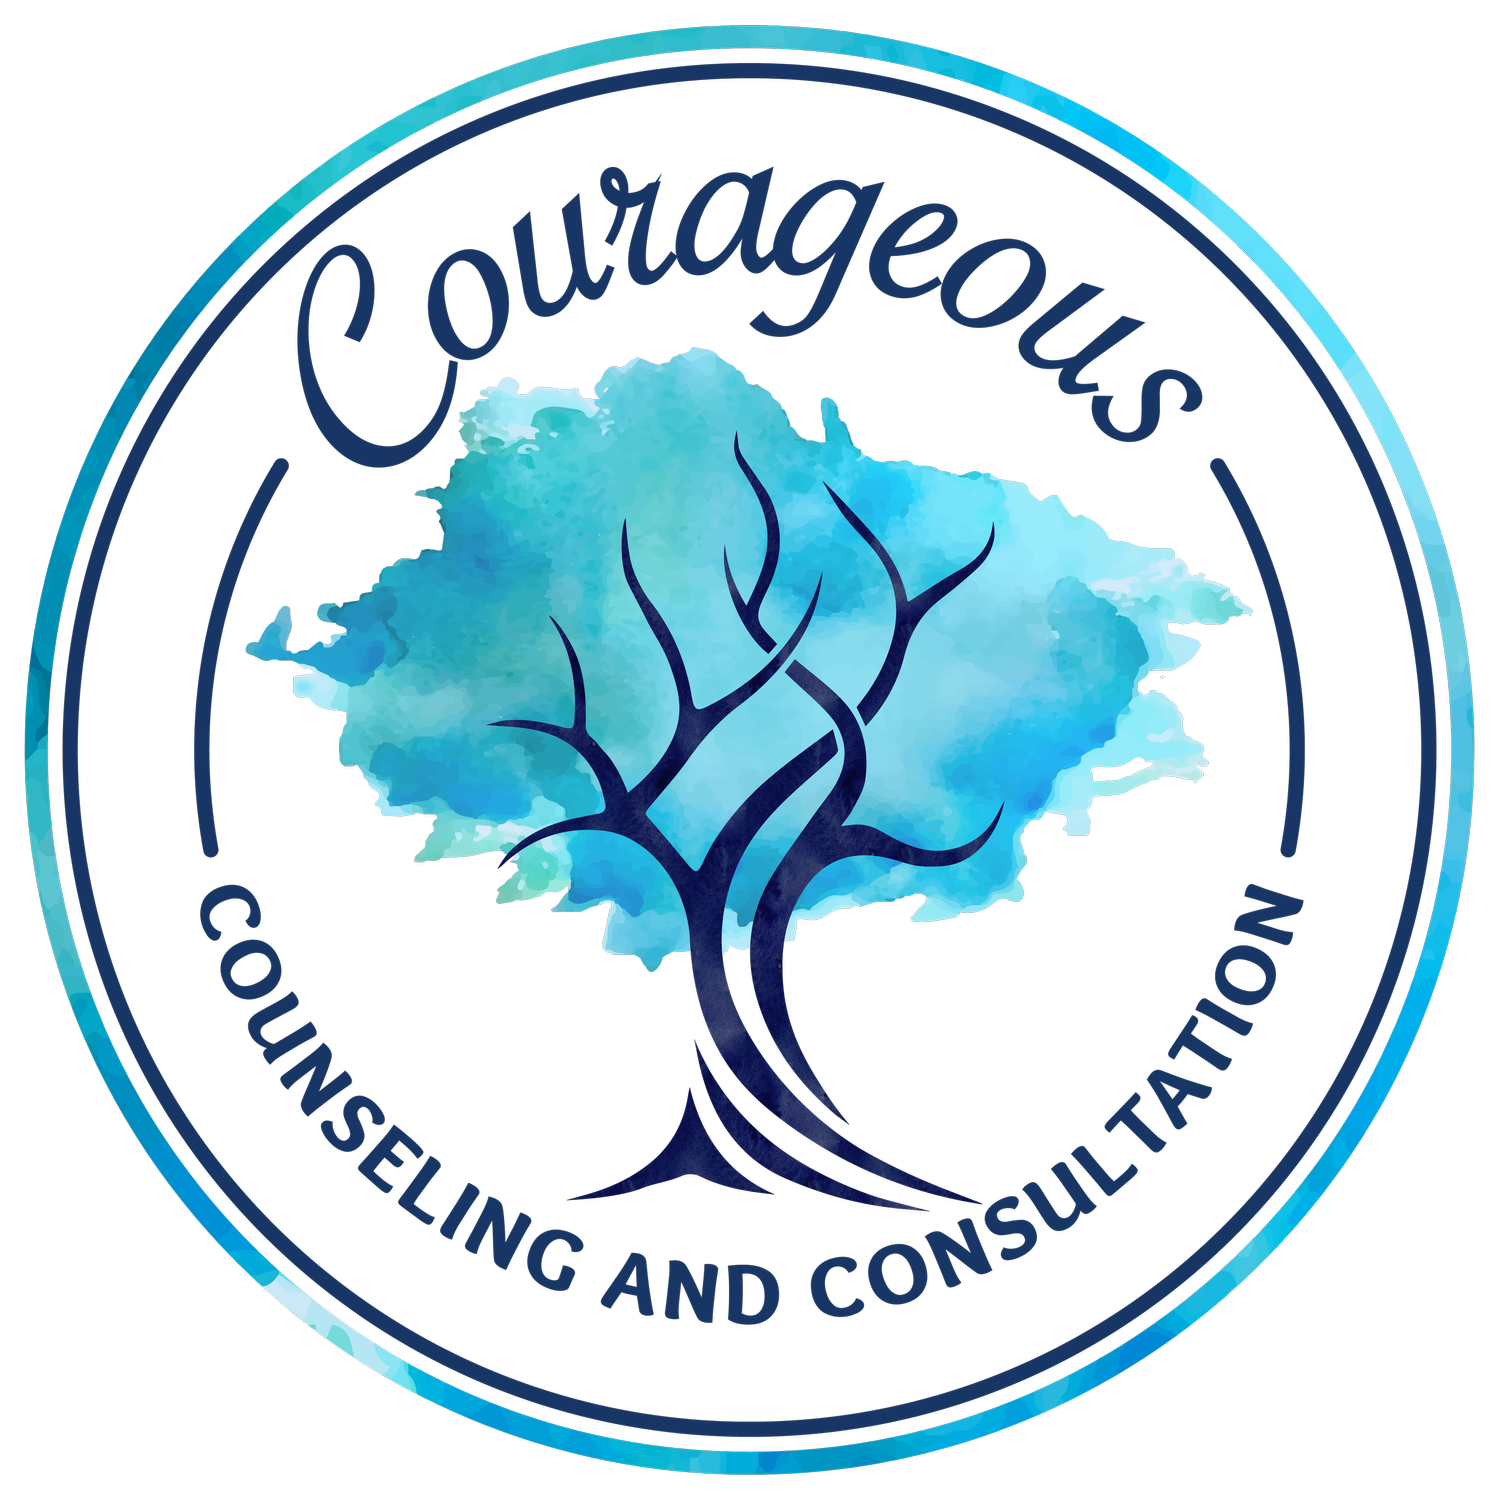 Courageous Counseling and Consultation, LLC